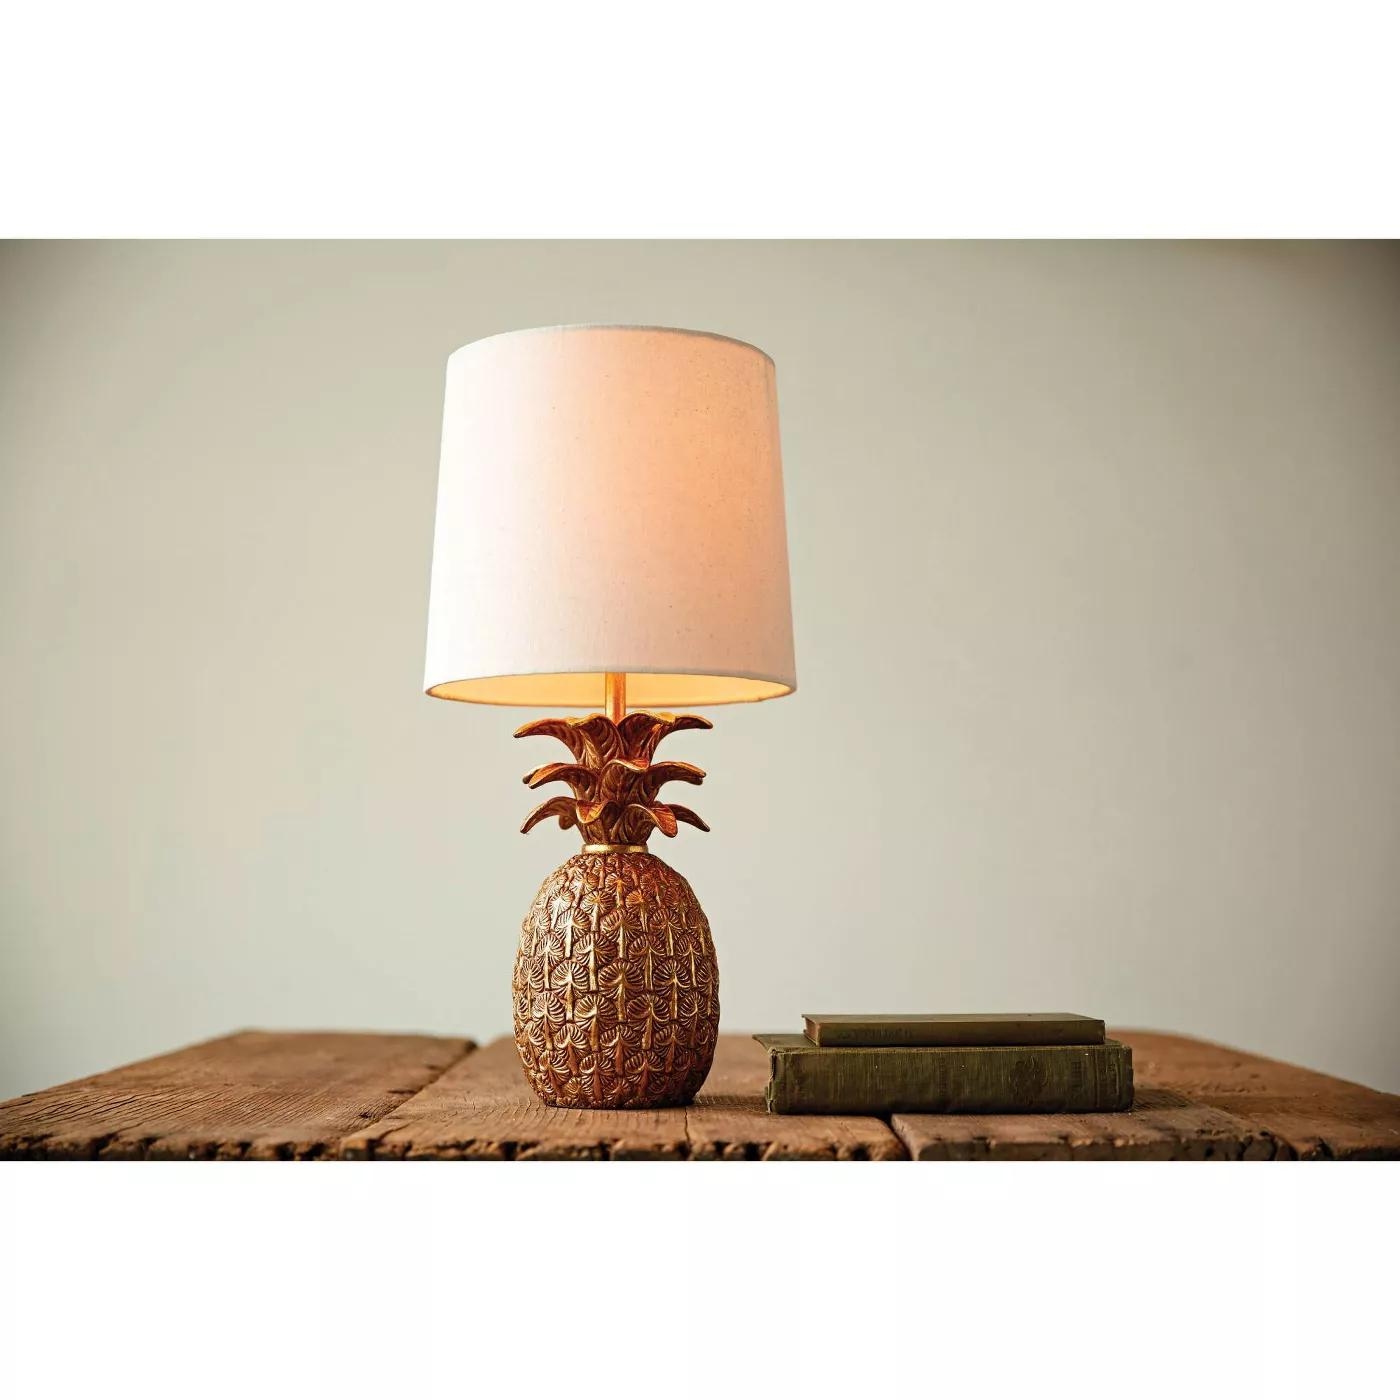 Resin Pineapple Shaped Table Lamp with Distressed Finish & Linen Shade - Image 1